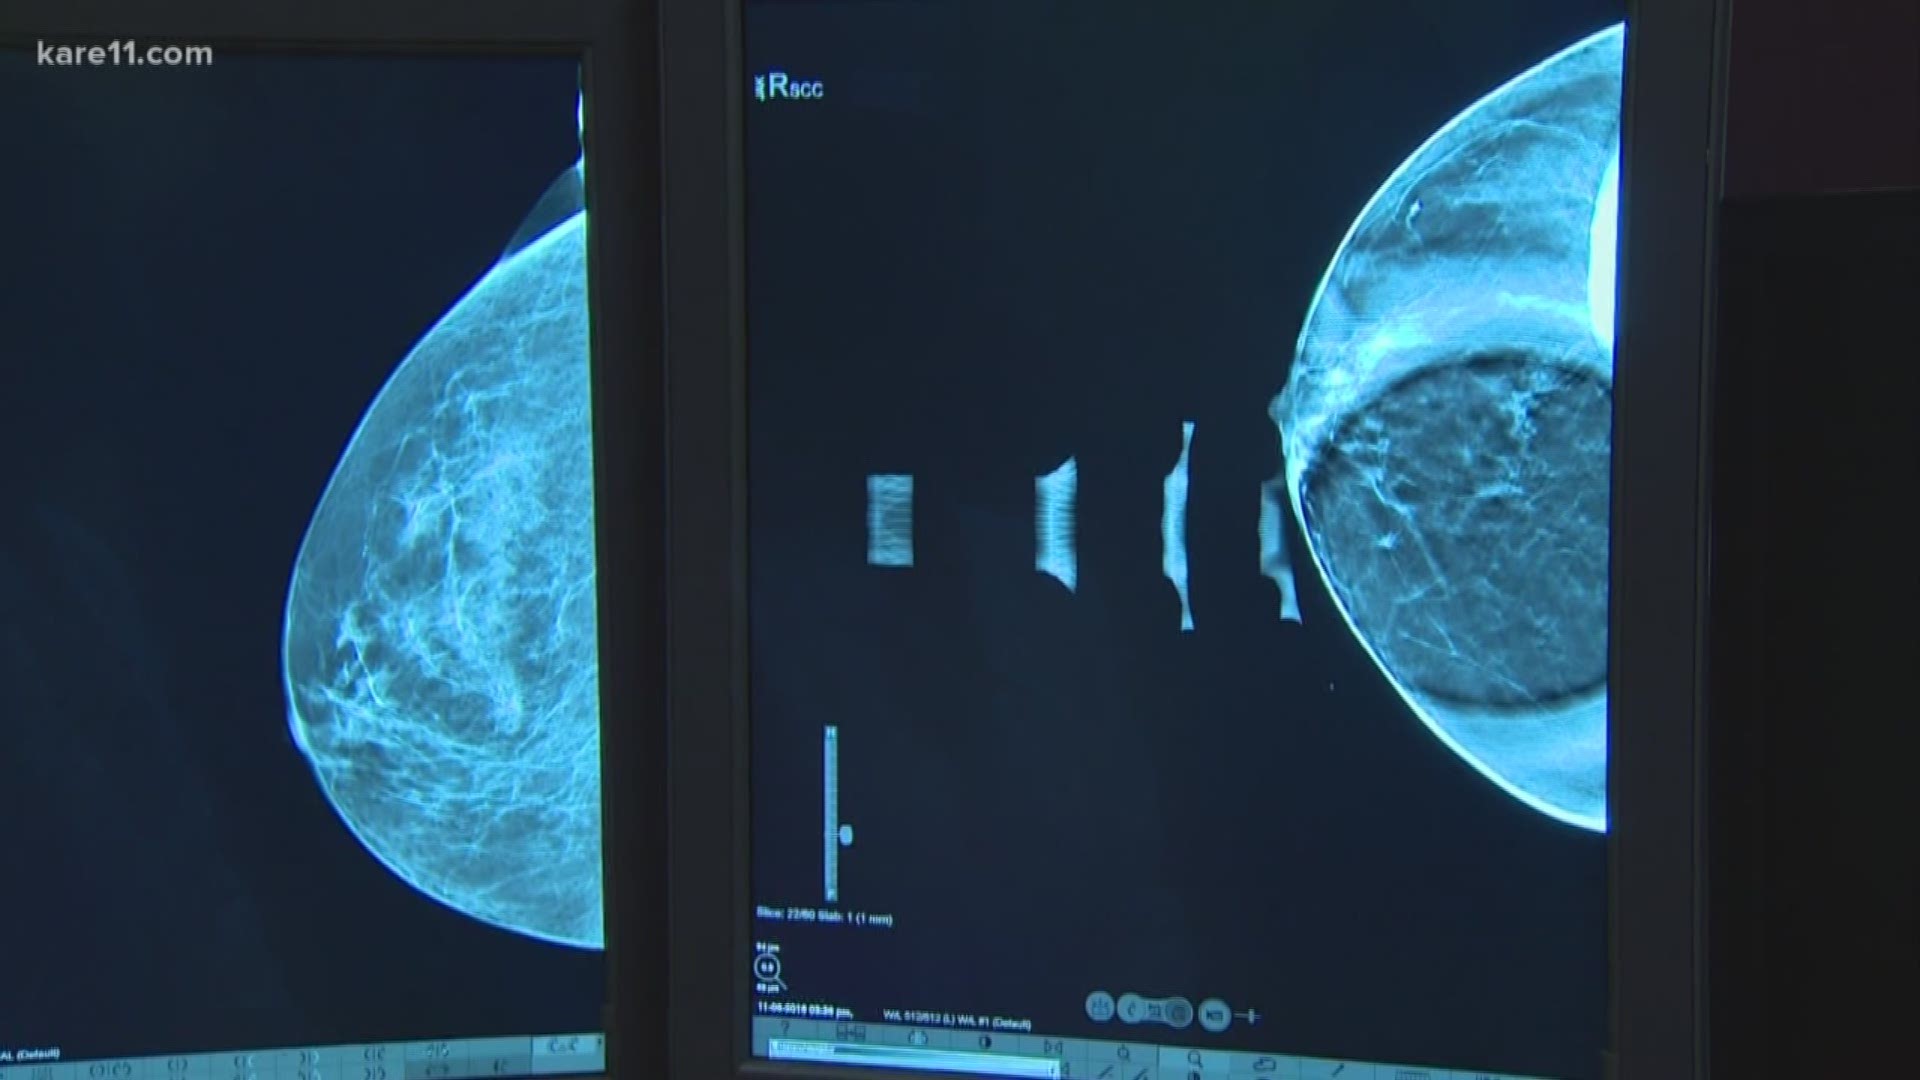 A traditional mammogram, or 2D scan, takes two images of the breast so you get four images total. A 3D scan takes an image every millimeter, which could lead to a couple hundred images.